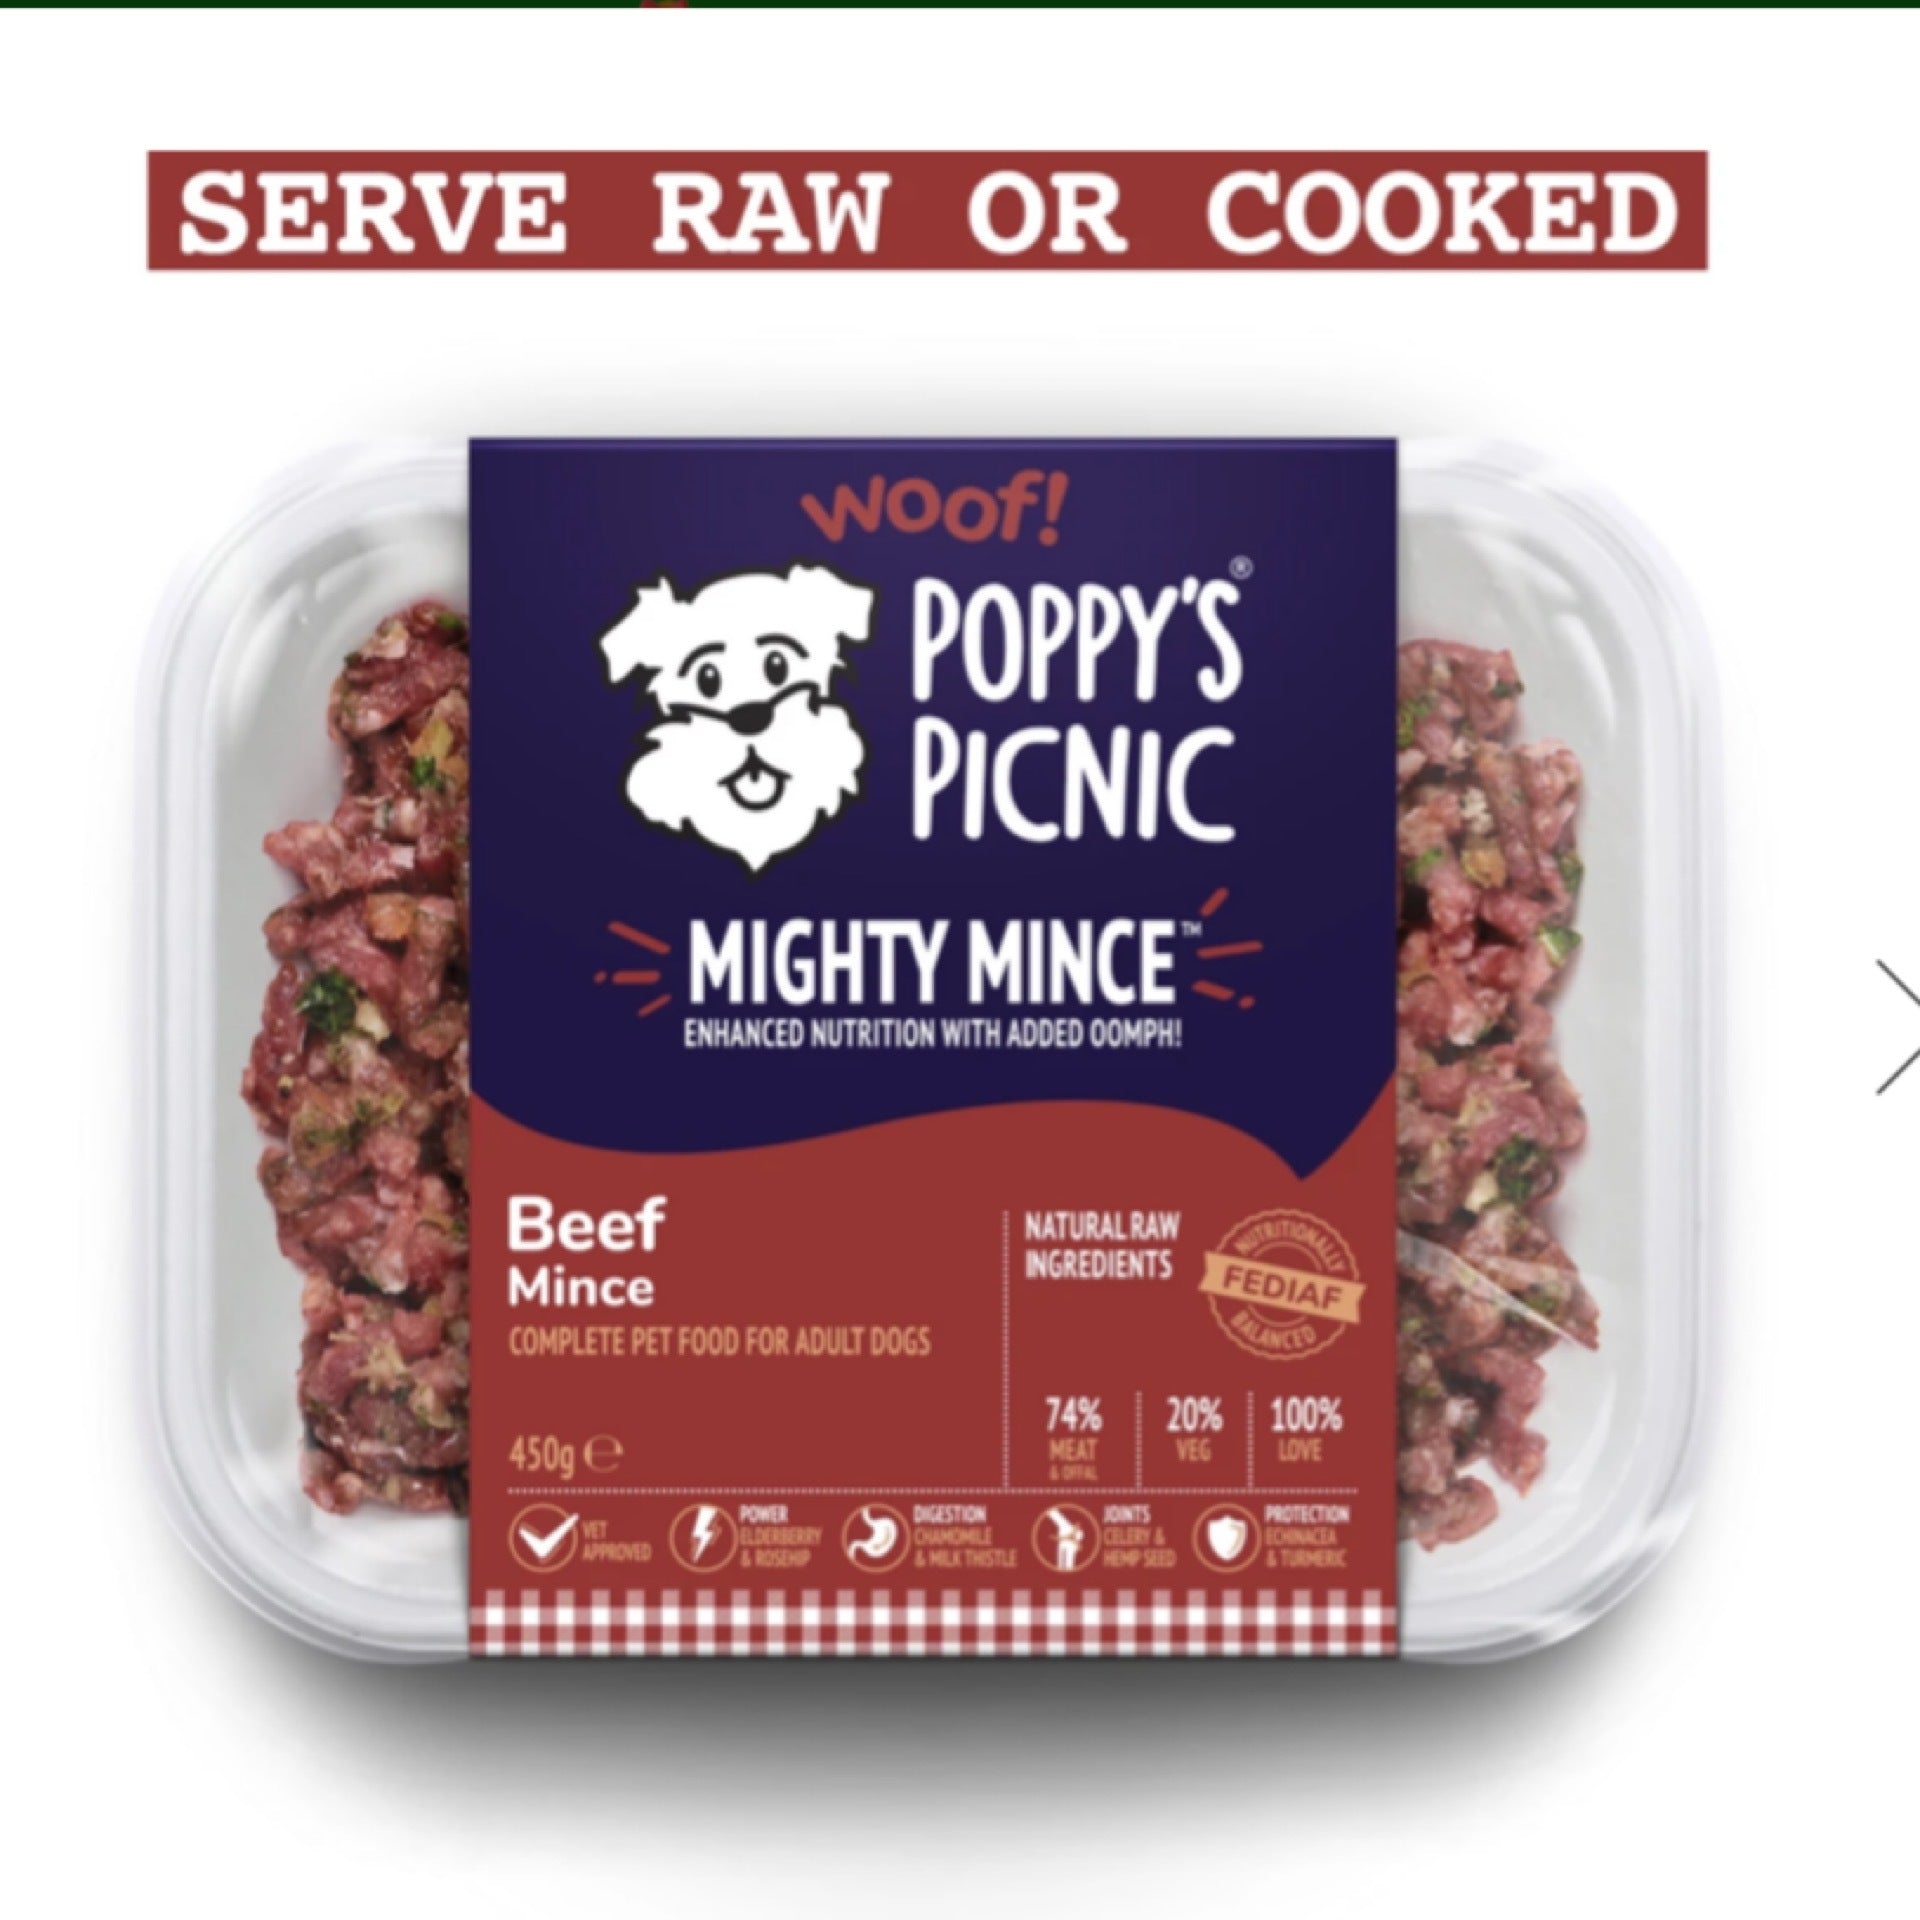 Poppy’s Picnic Mighty Mince Beef 450g